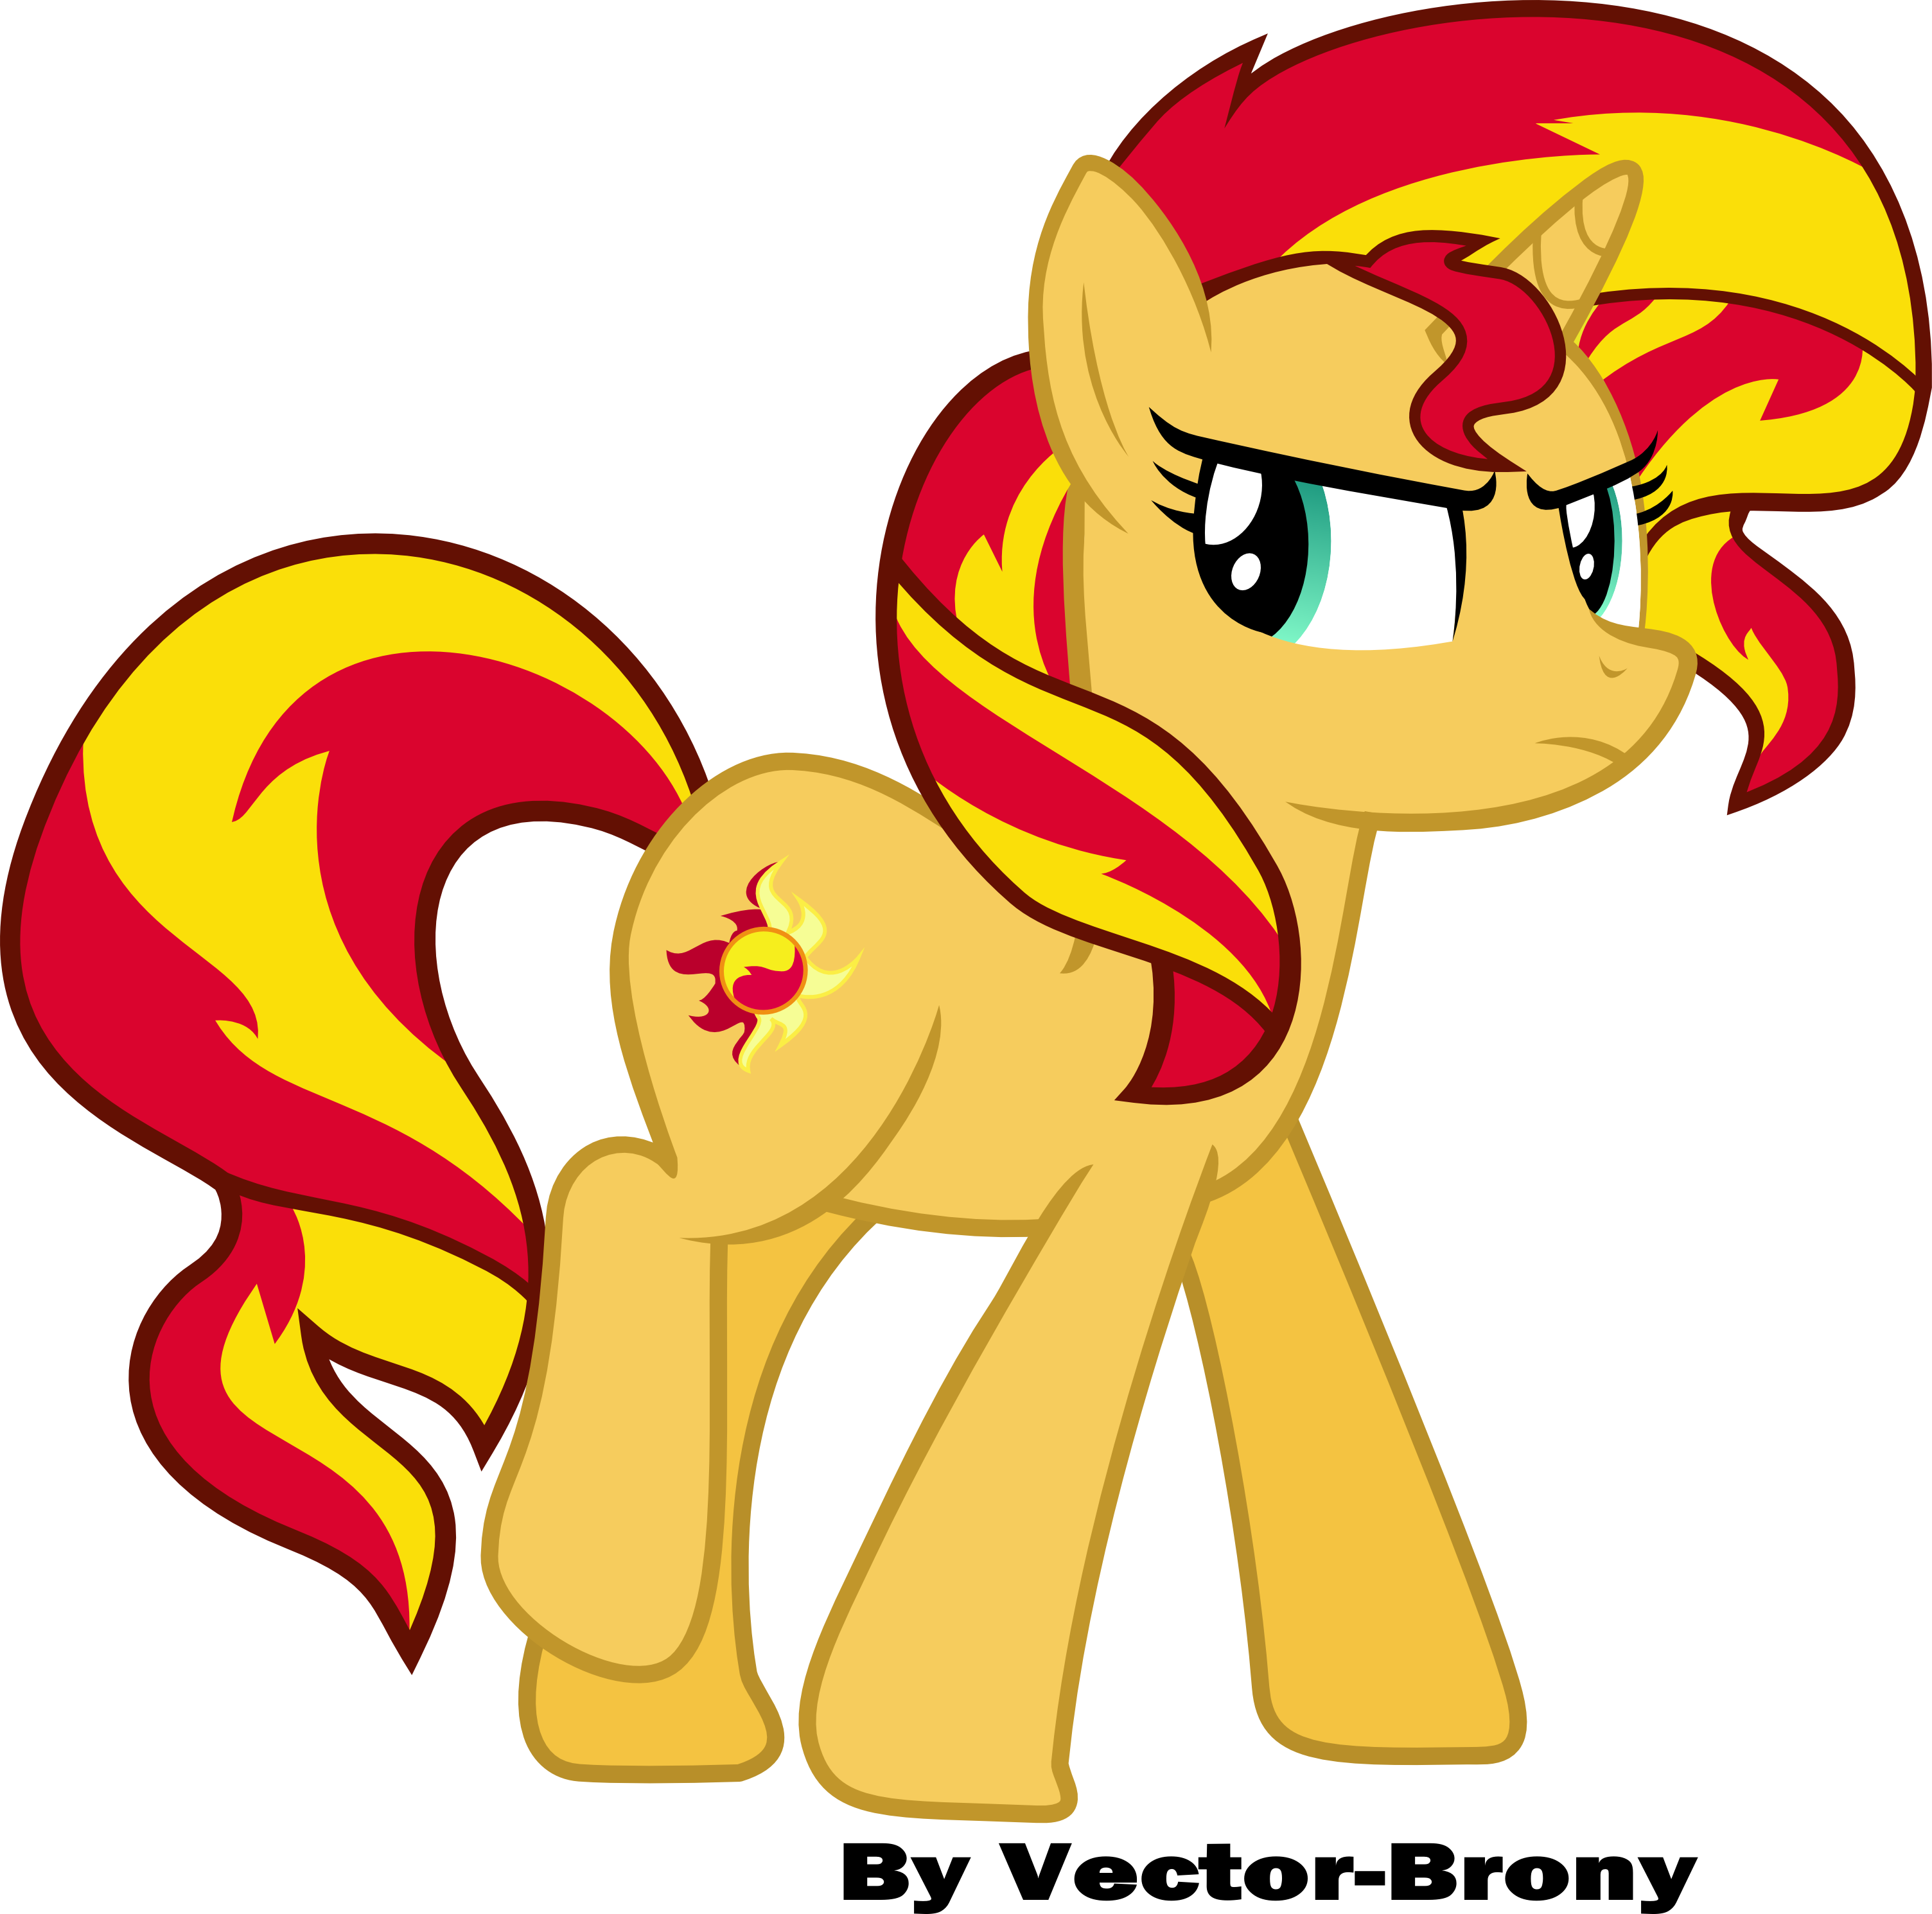 Sunset Shimmer Walking Away By Vector-brony - My Little Pony Sunset Shimmer Pony (3008x2980)